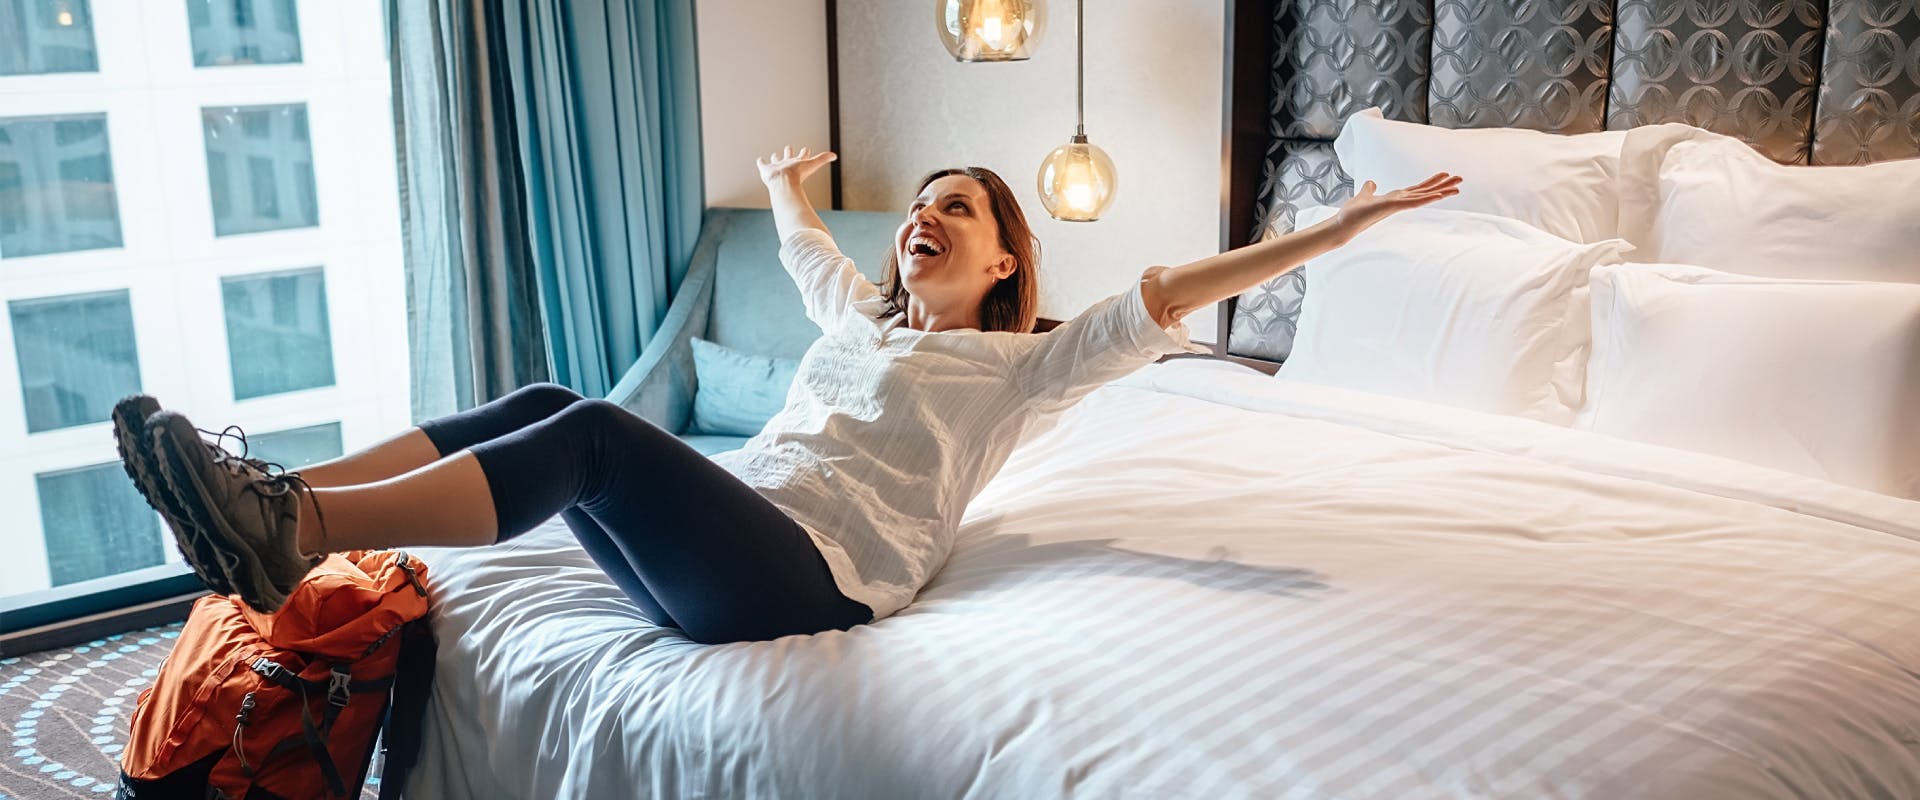 A woman sits on a hotel bed.